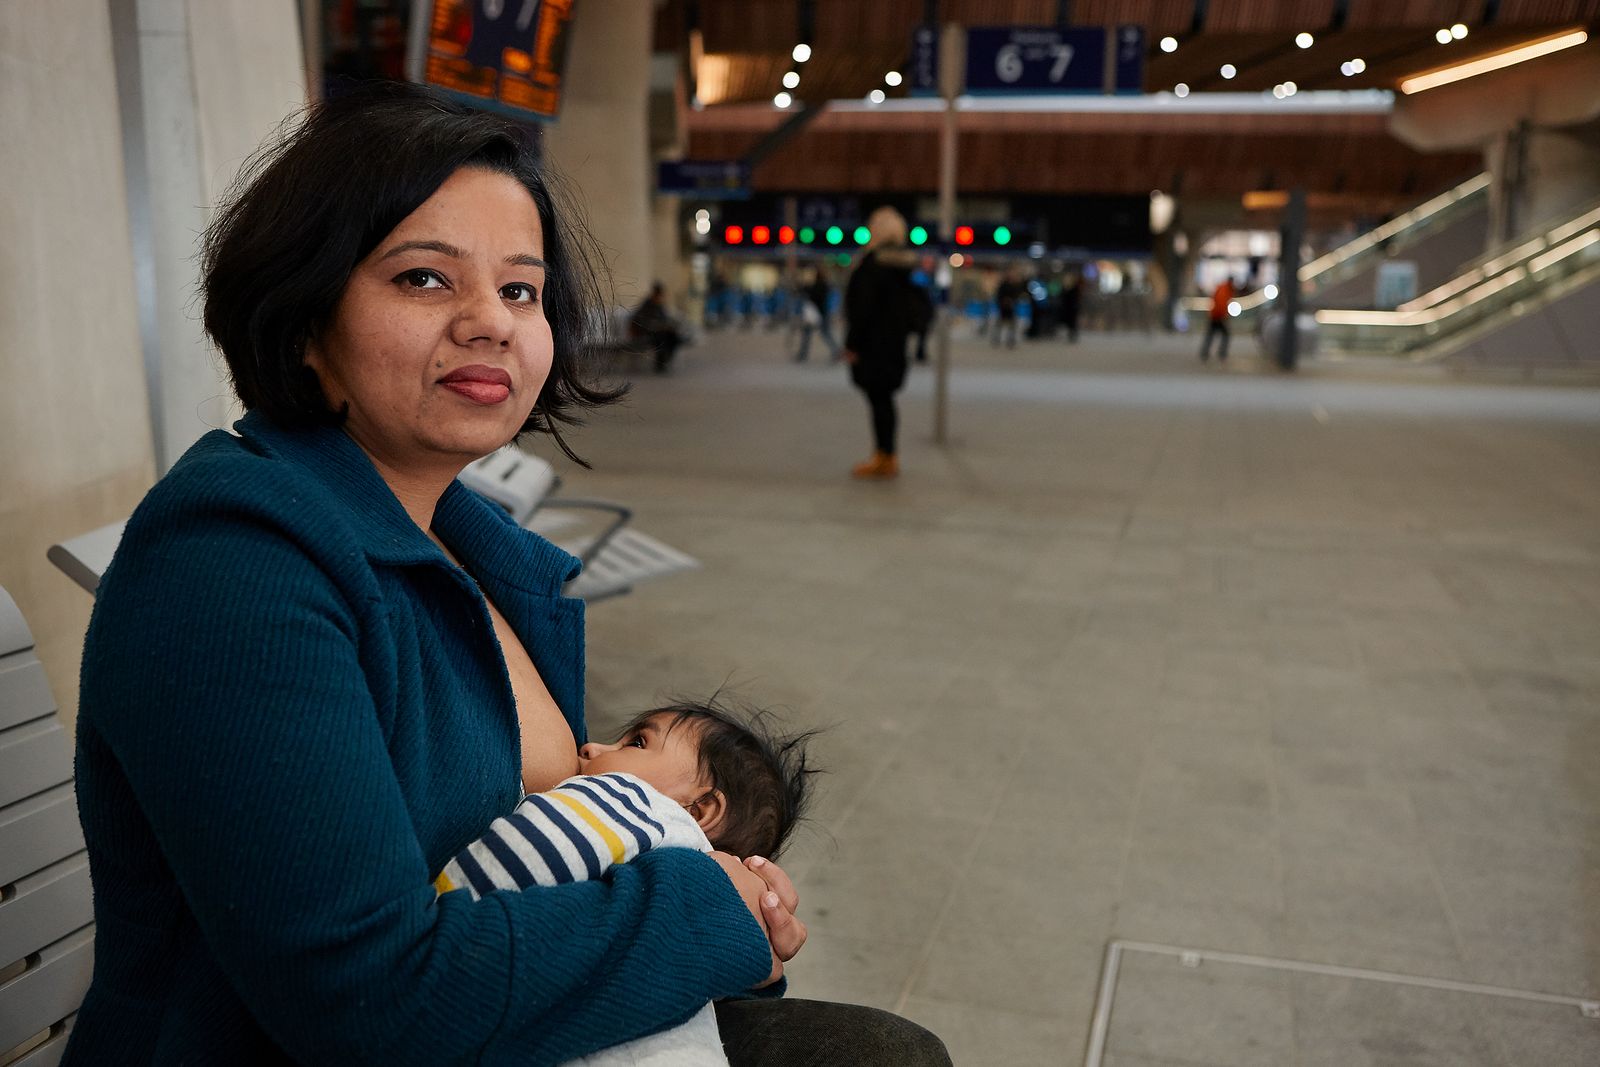 © Nitin Sachania - Image from the Breastfeeding in Public - Wherever, Whenever! photography project